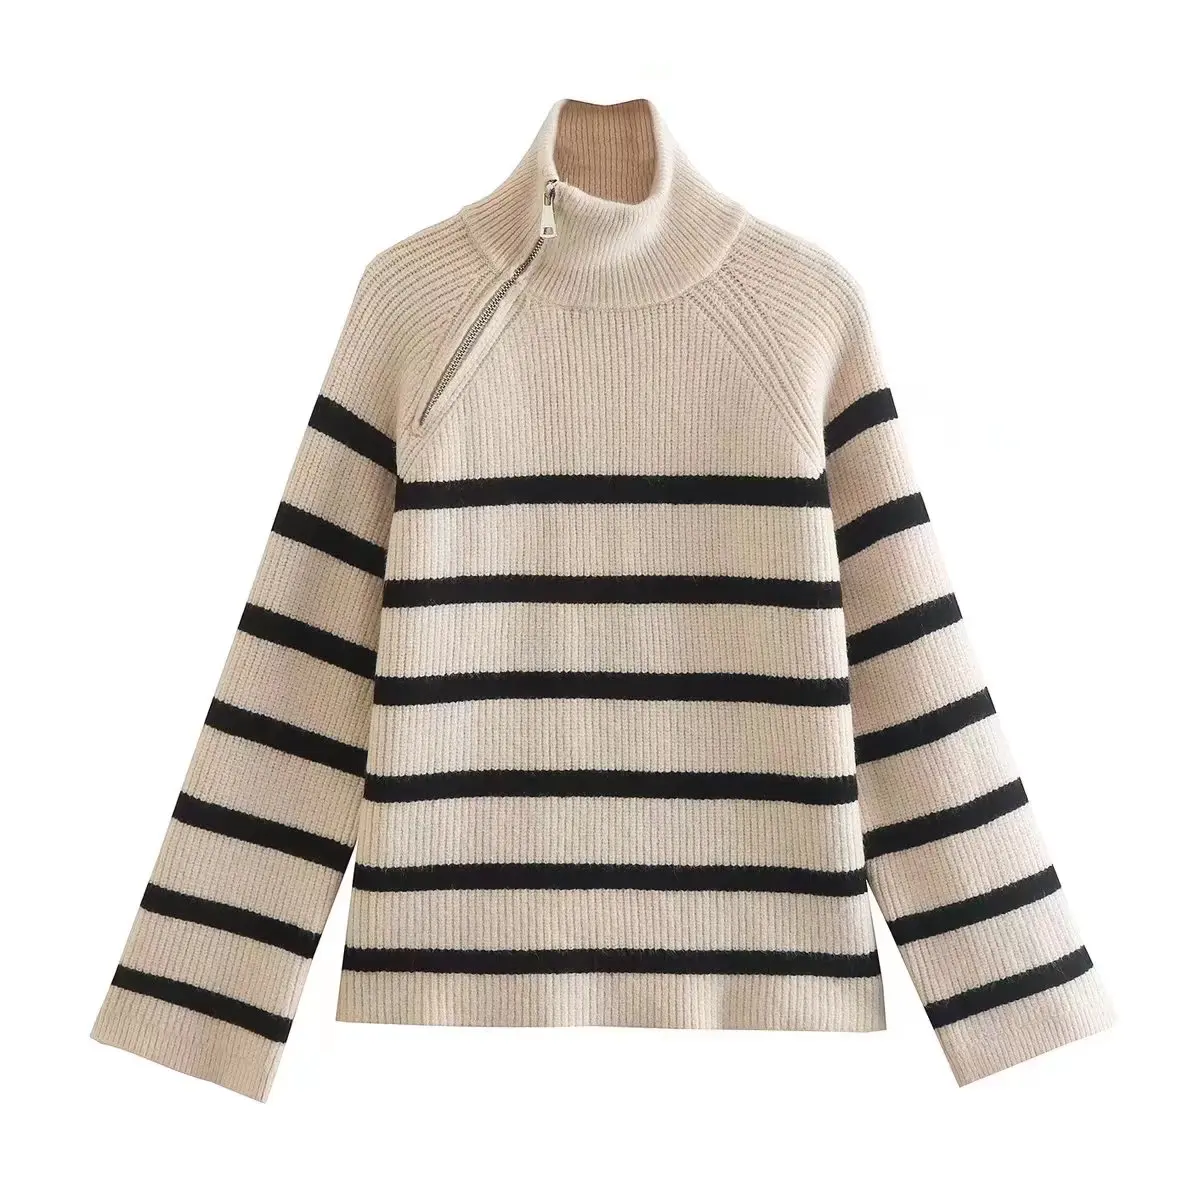 

Strips Sweater Women Turtleneck with Zipper Pullover Sweaters Tops Fall Winter Warm Clothes Long Sleeve Top Jumpers Female